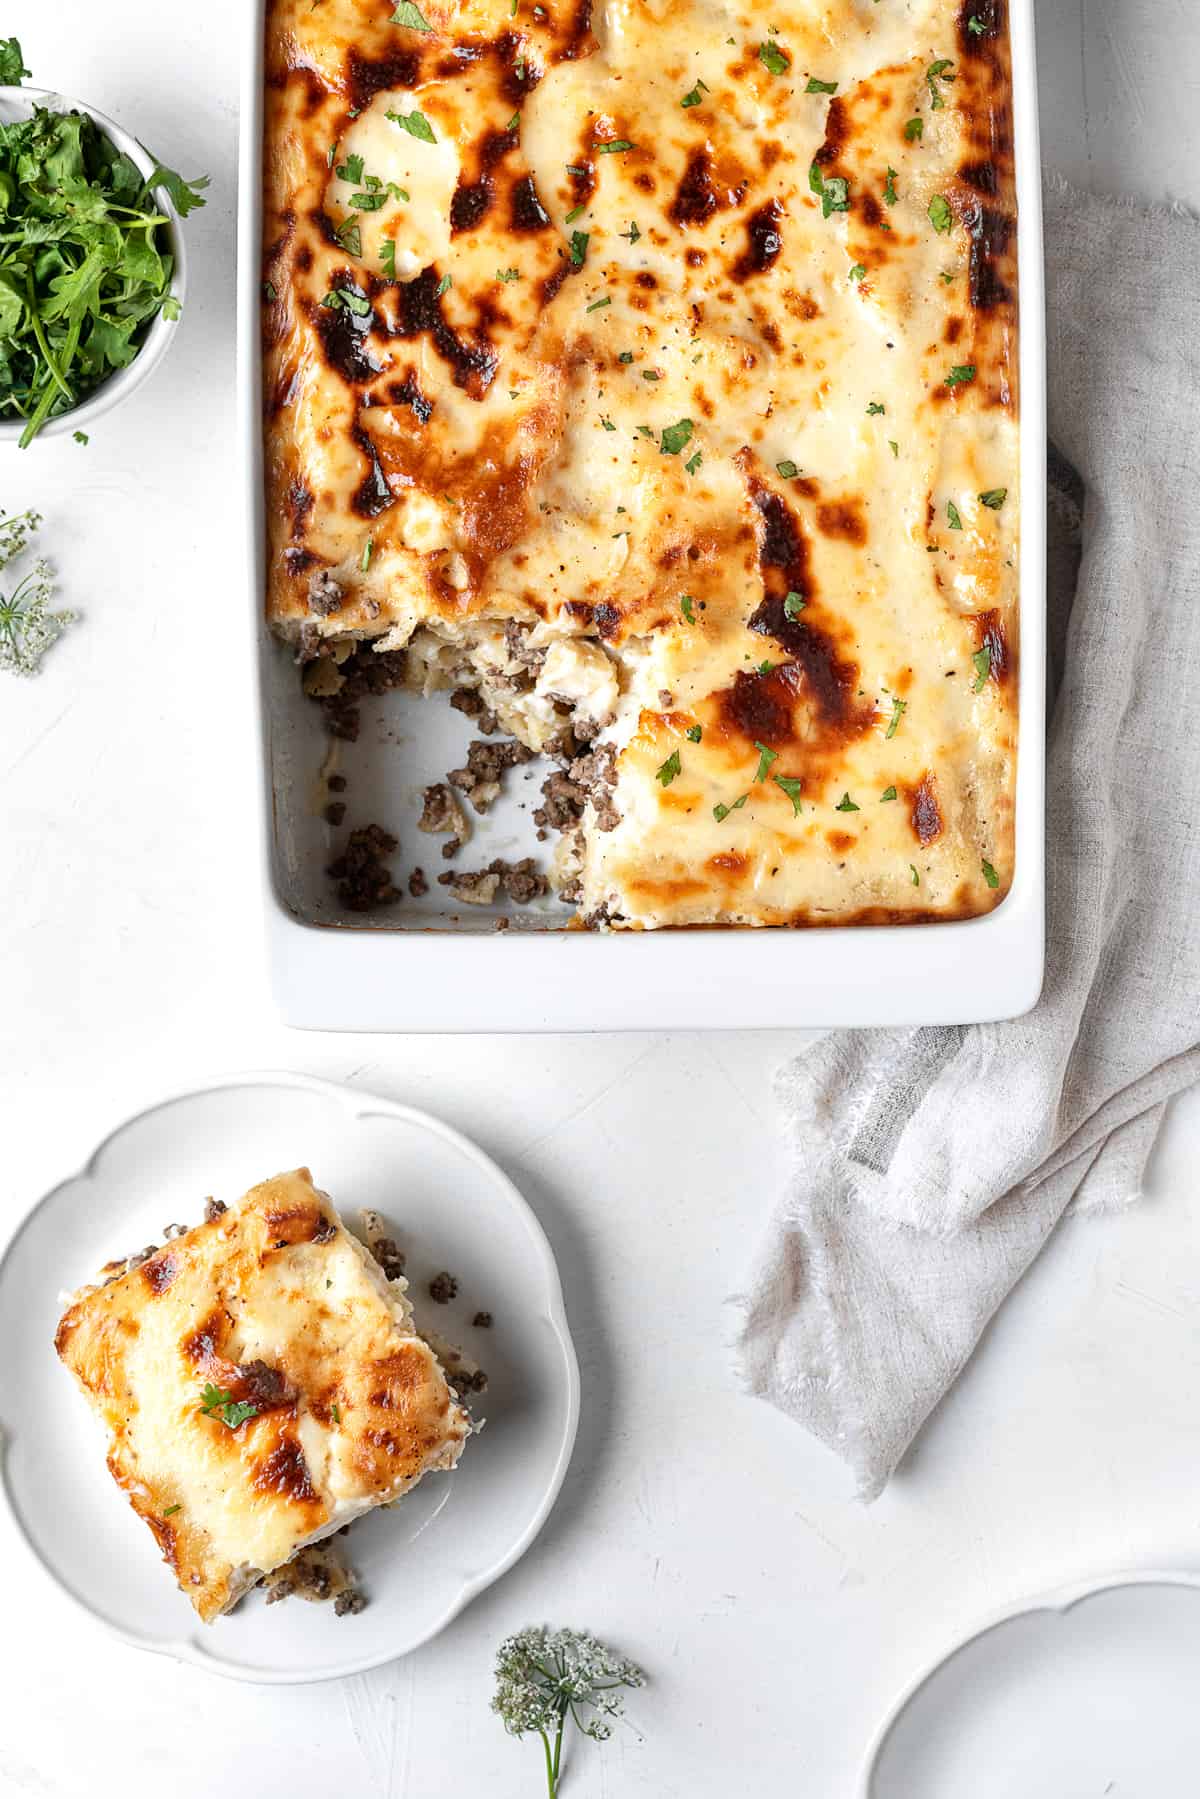 Baked Penne Pasta with Bechamel Sauce in a casserole dish with a serving missing